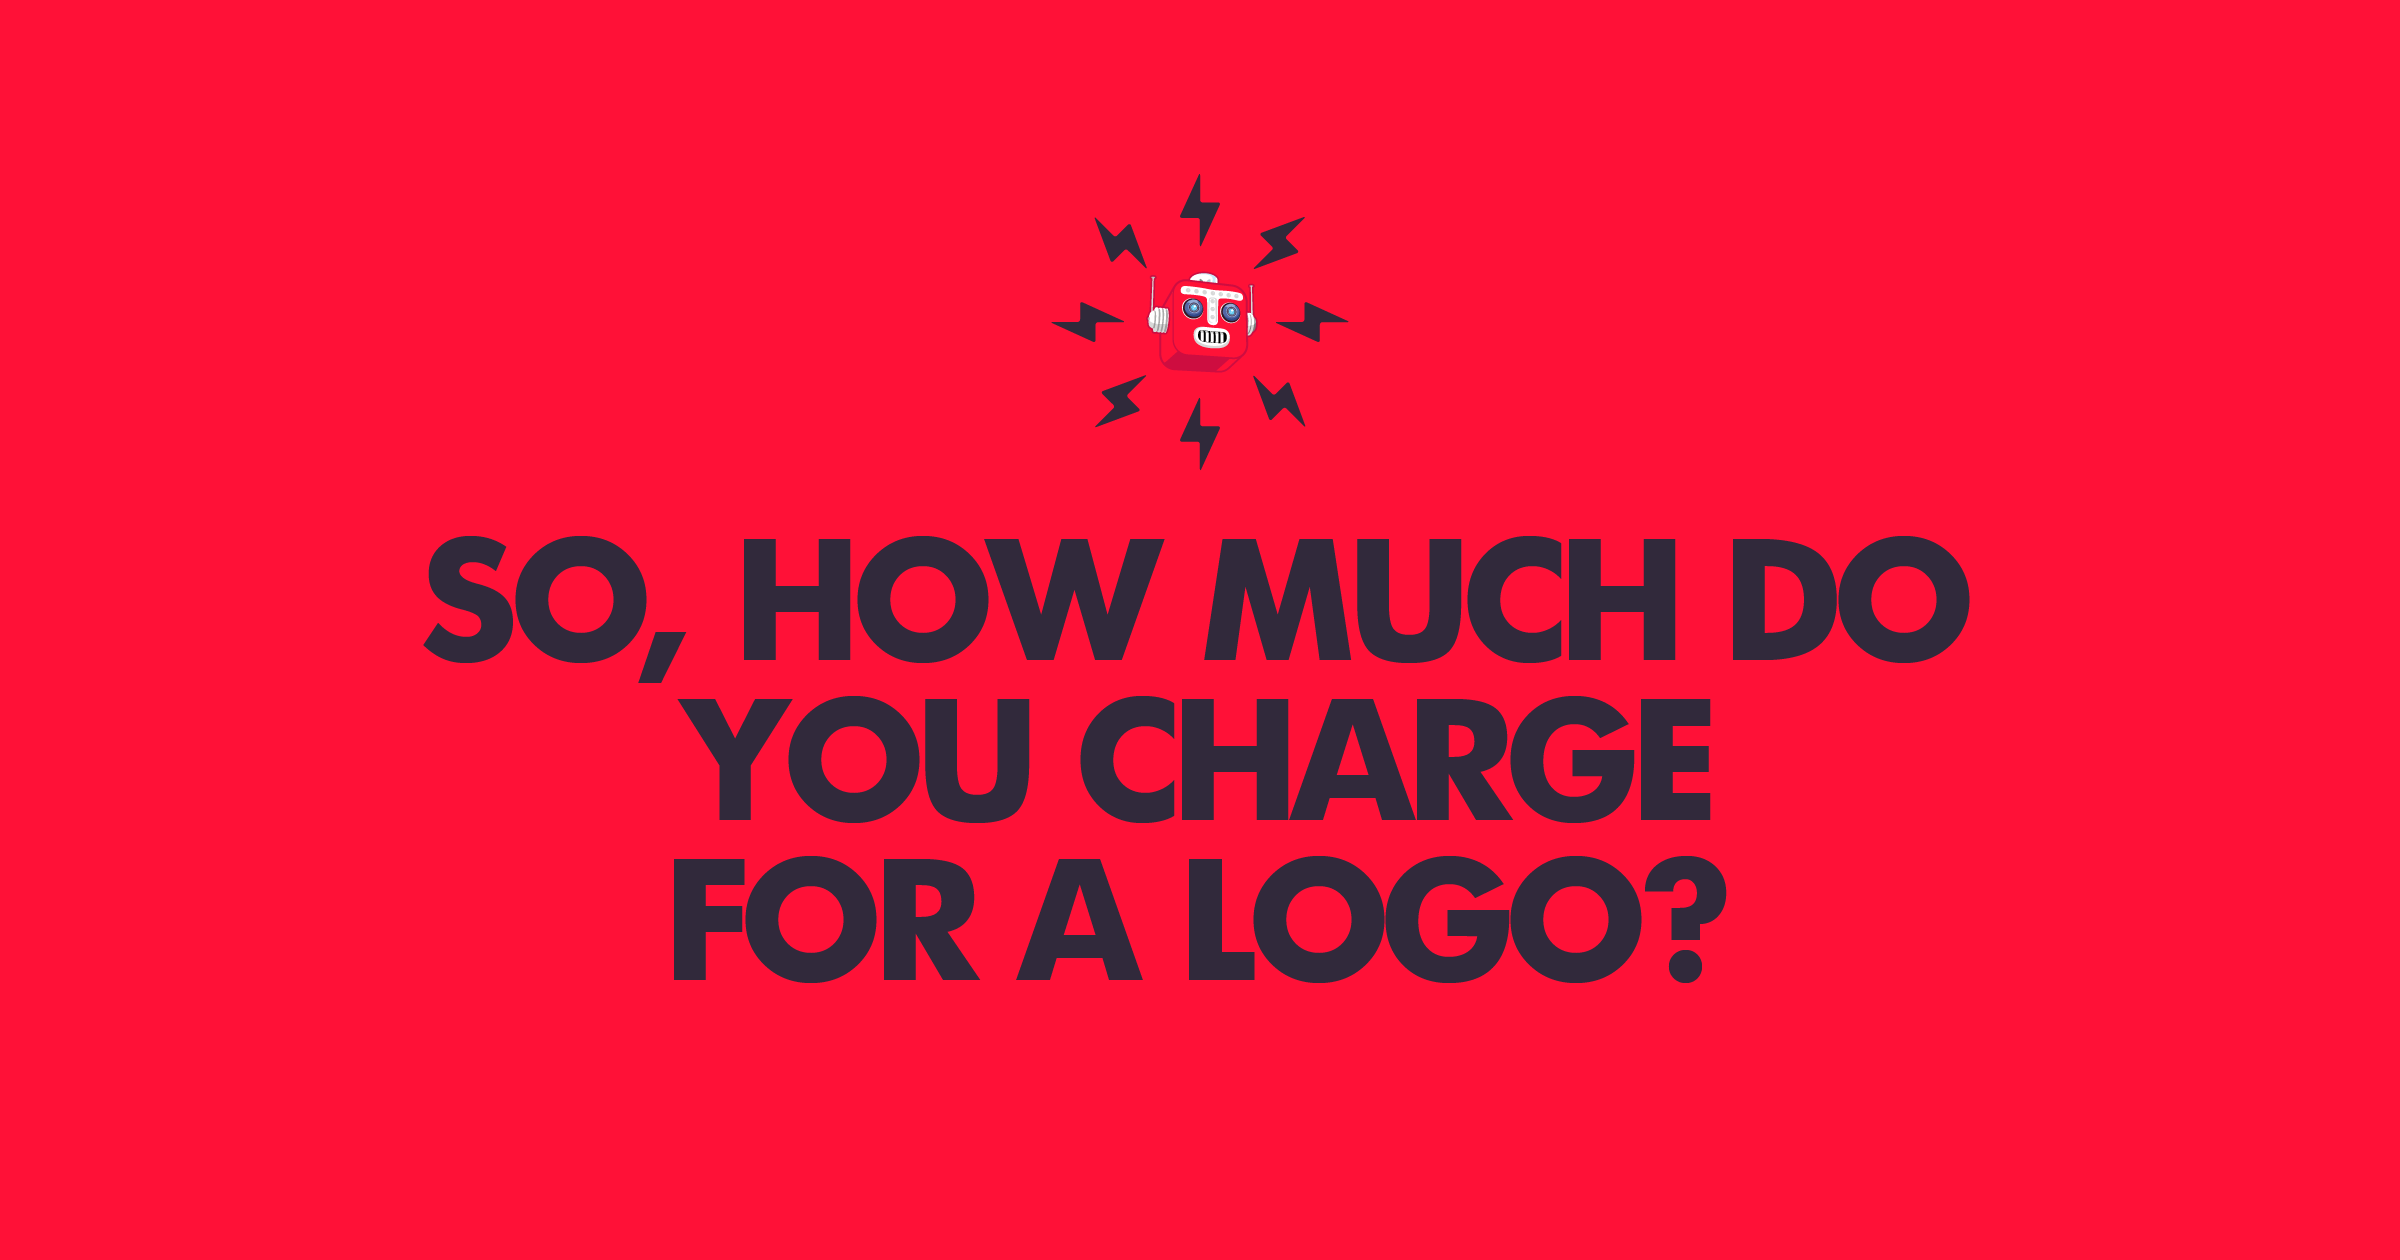 How much do you charge for a logo?